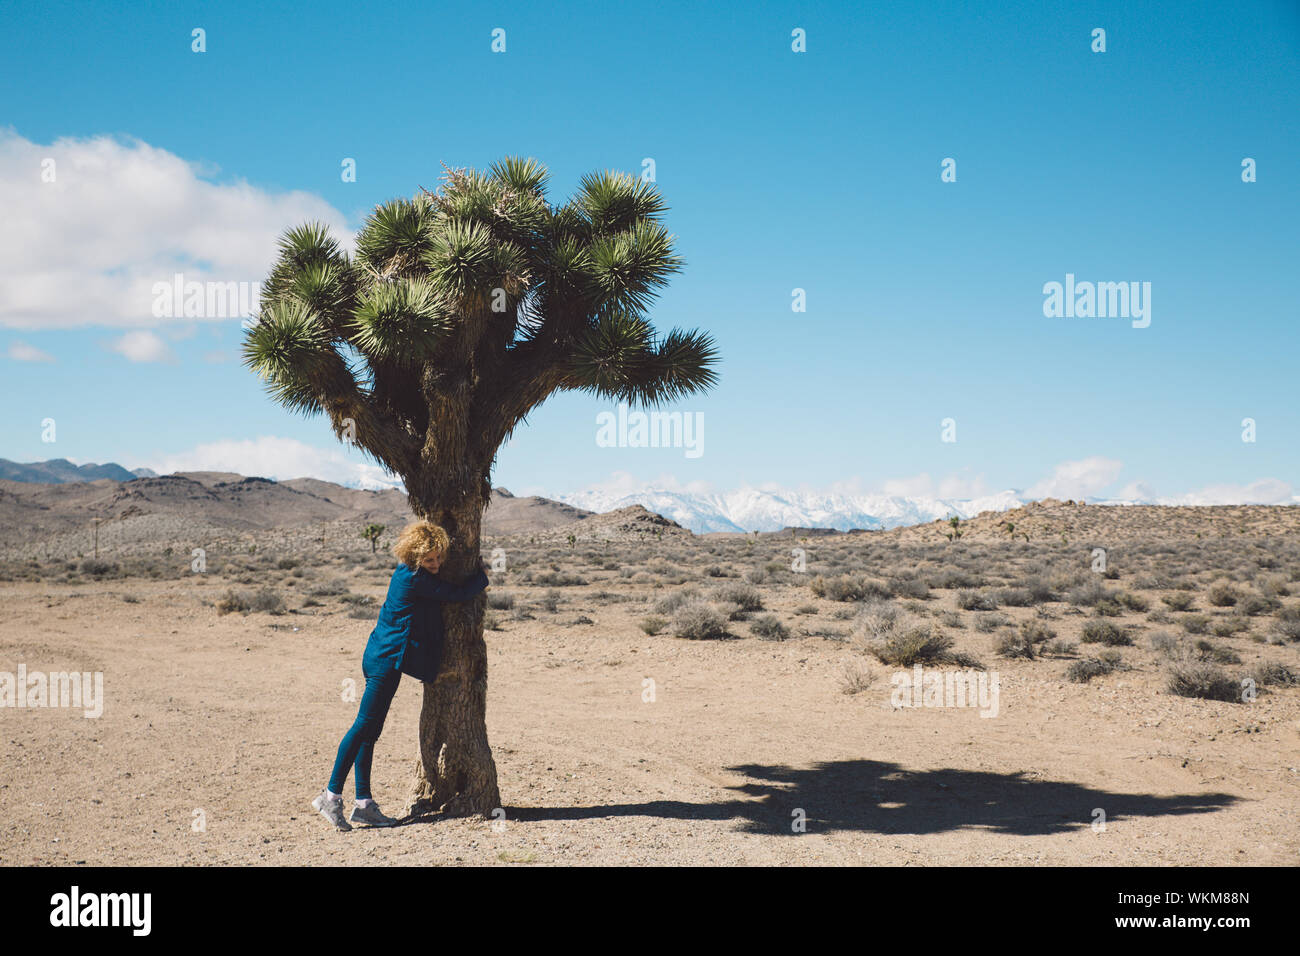 Full Length Of Woman Hugging Tree At Death Valley National Park Against Sky Stock Photo